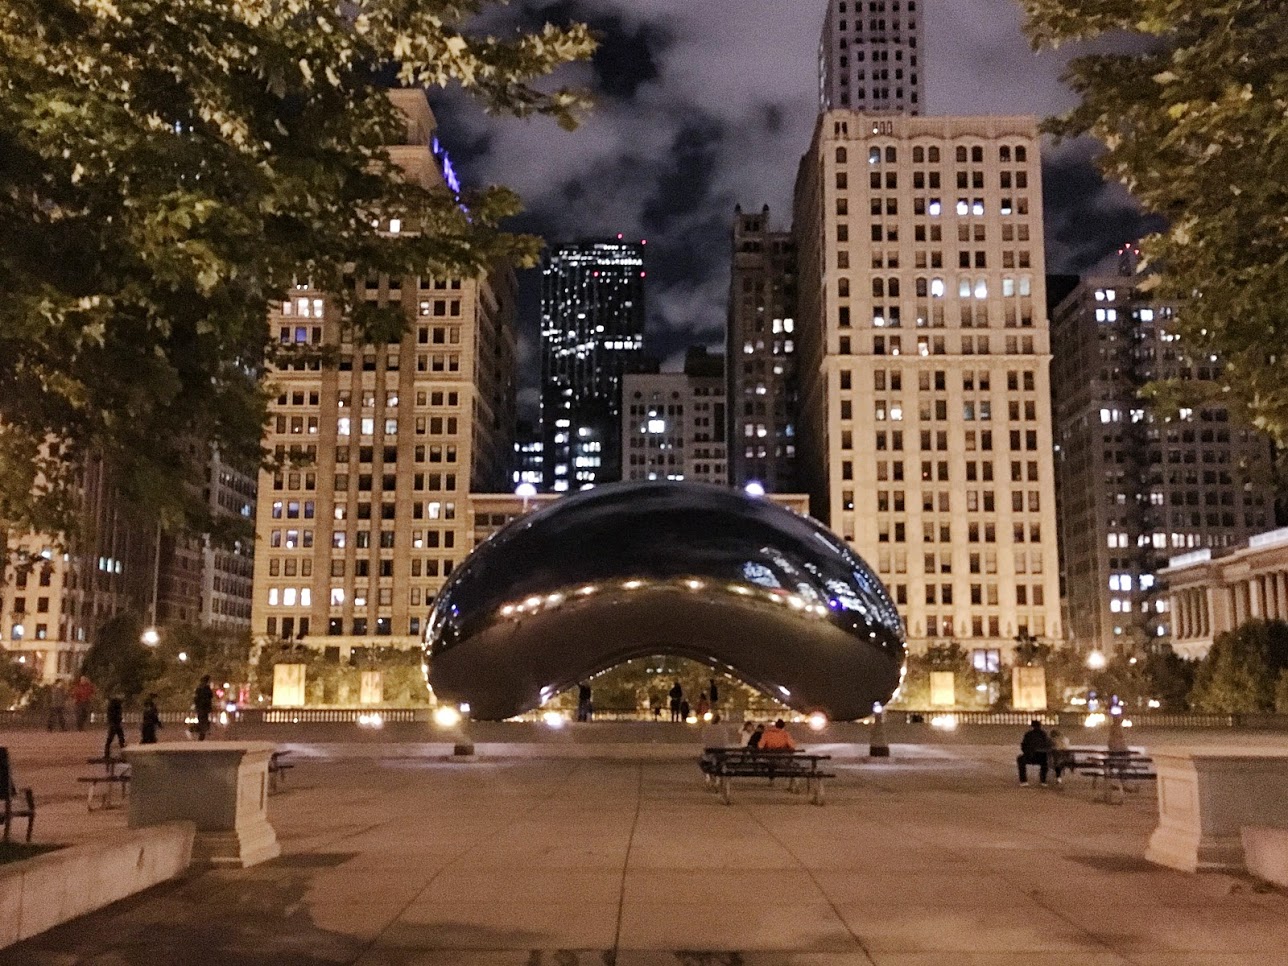 Chicago The Bean Cloud Gate at Night